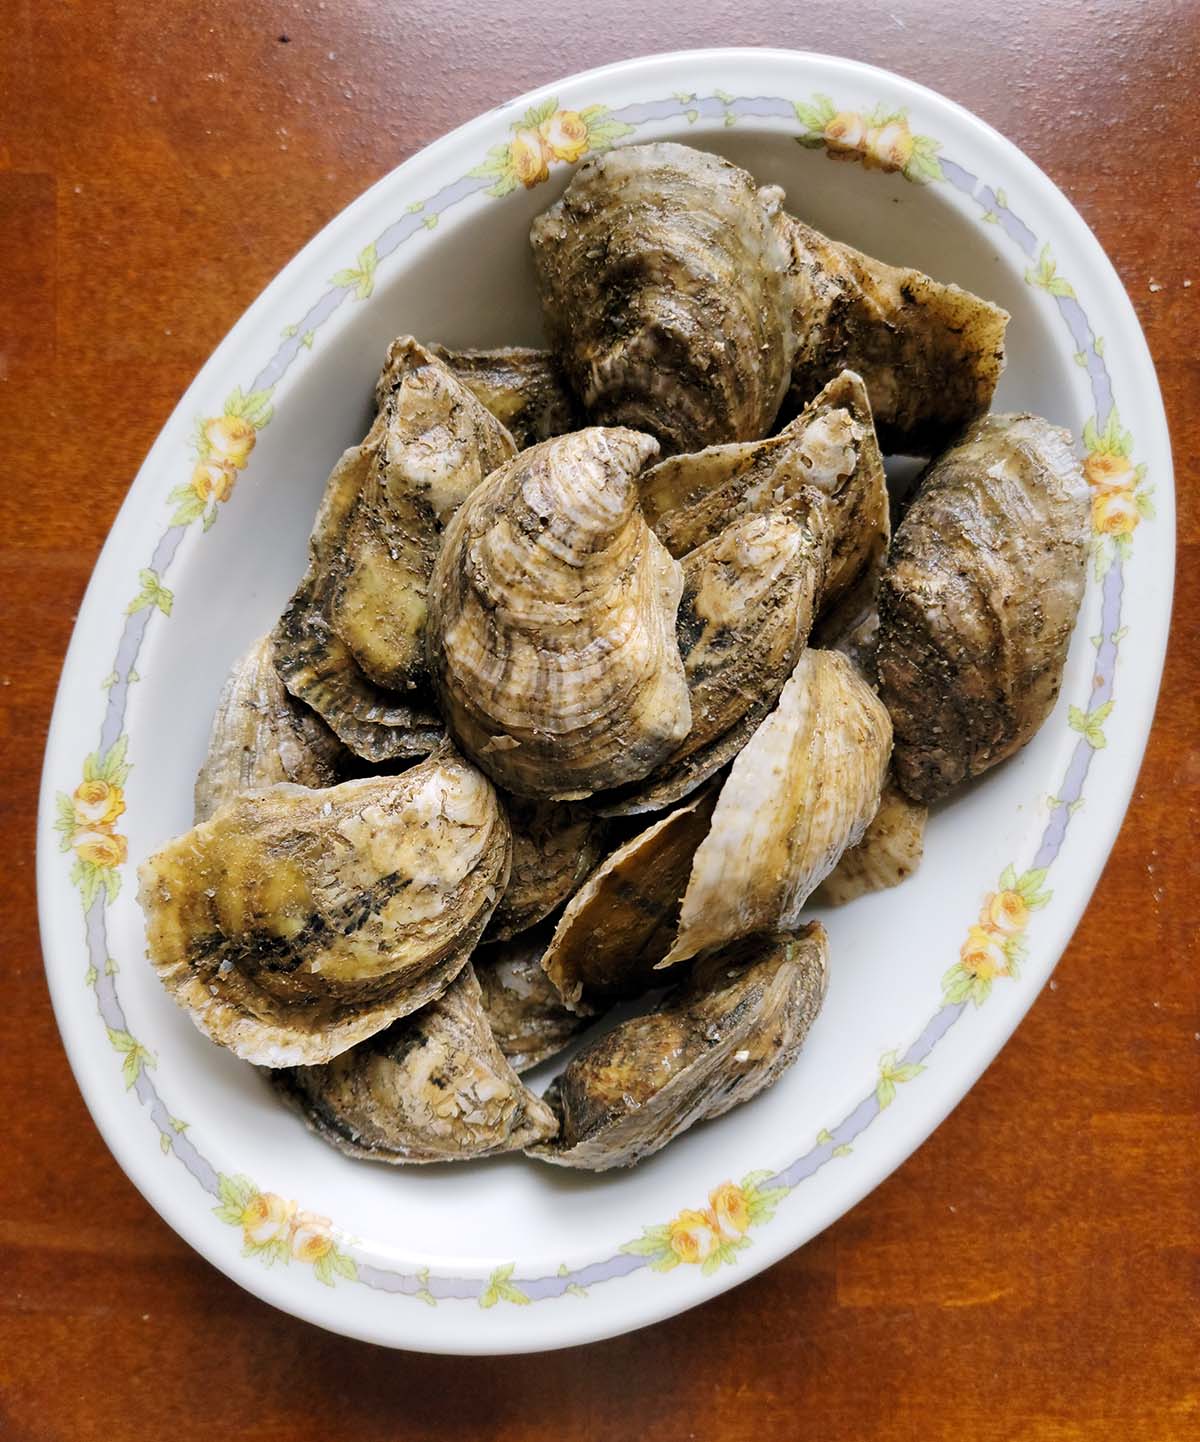 https://honest-food.net/wp-content/uploads/2023/12/Southern-oysters.jpg